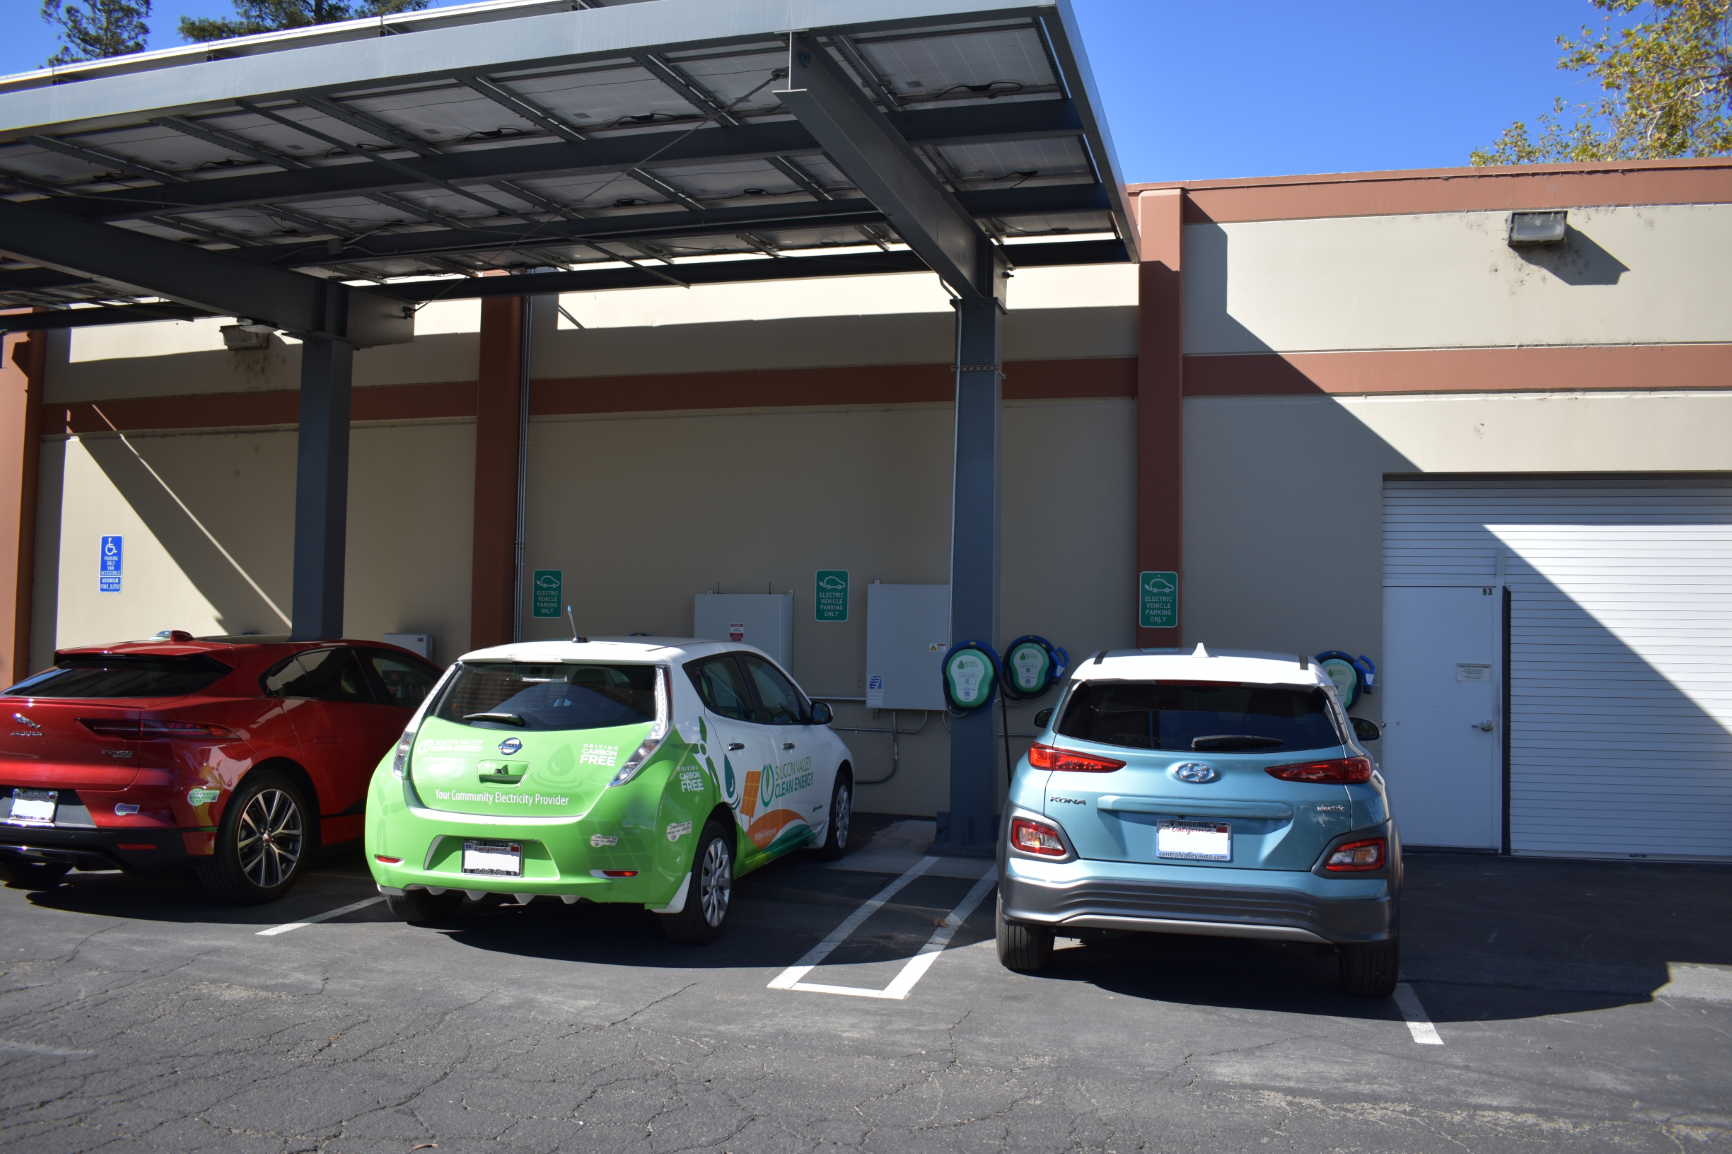 image of three cars charging under solar panel canopy